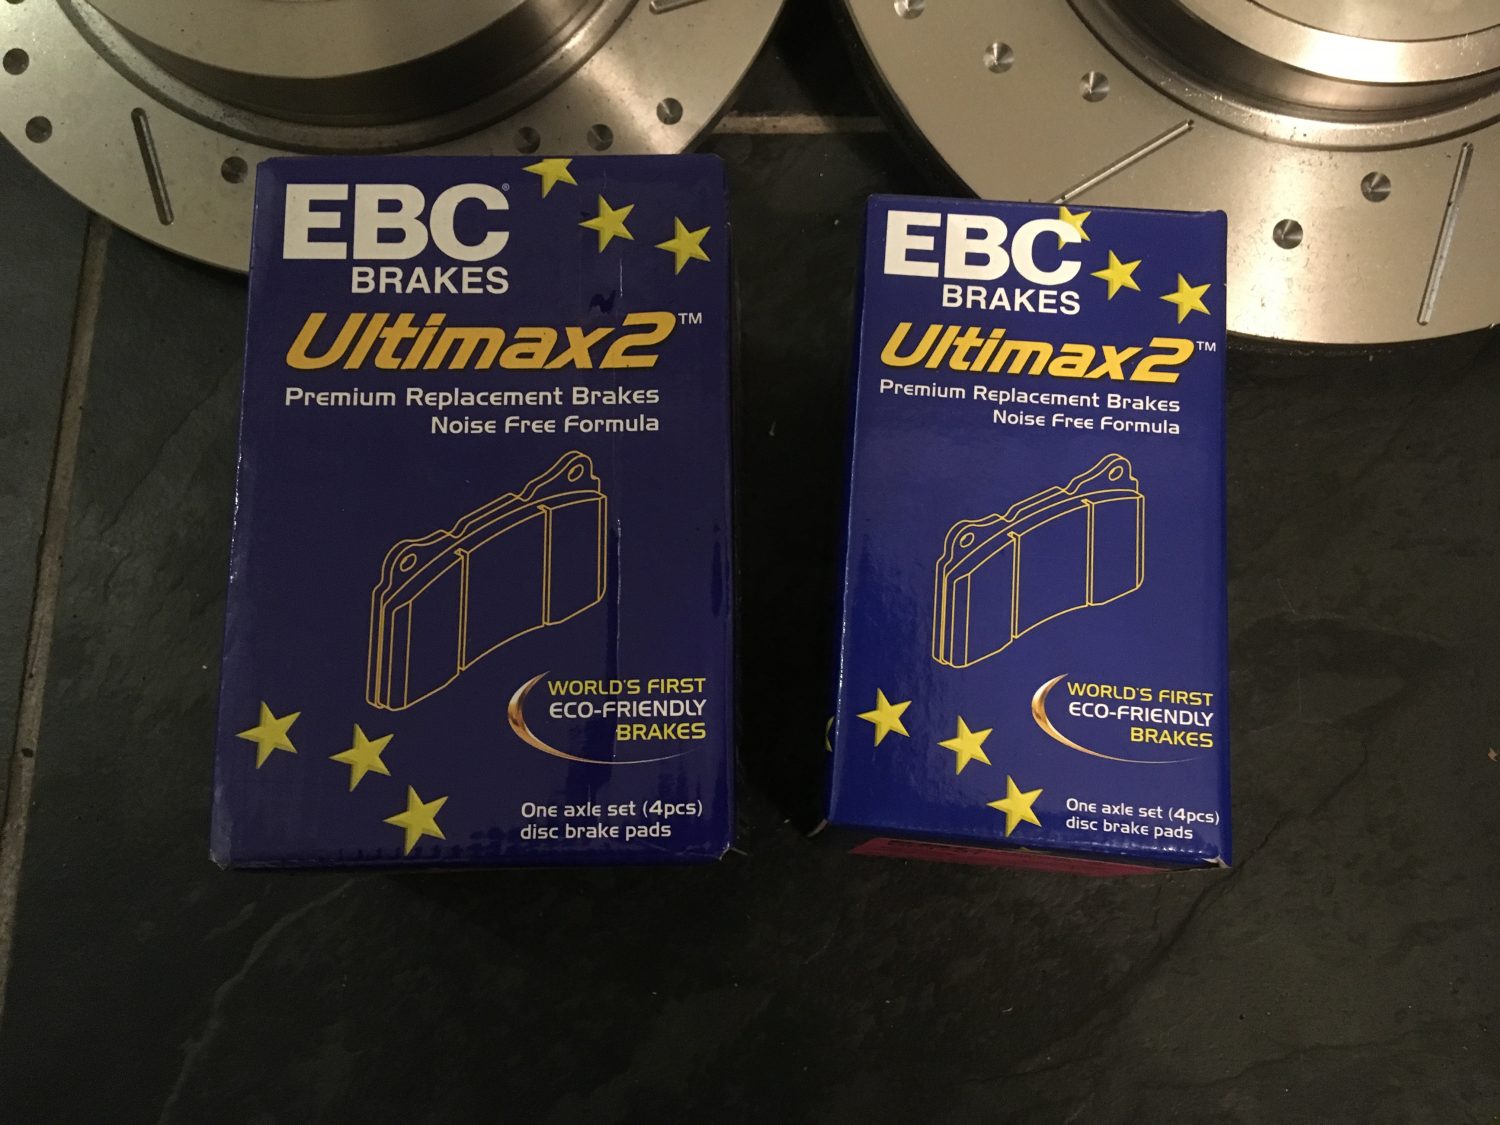 Mini R52 Convertible Cooper S Grooved Brake Discs & EBC UltiMAX Pads, Fnt + Rear